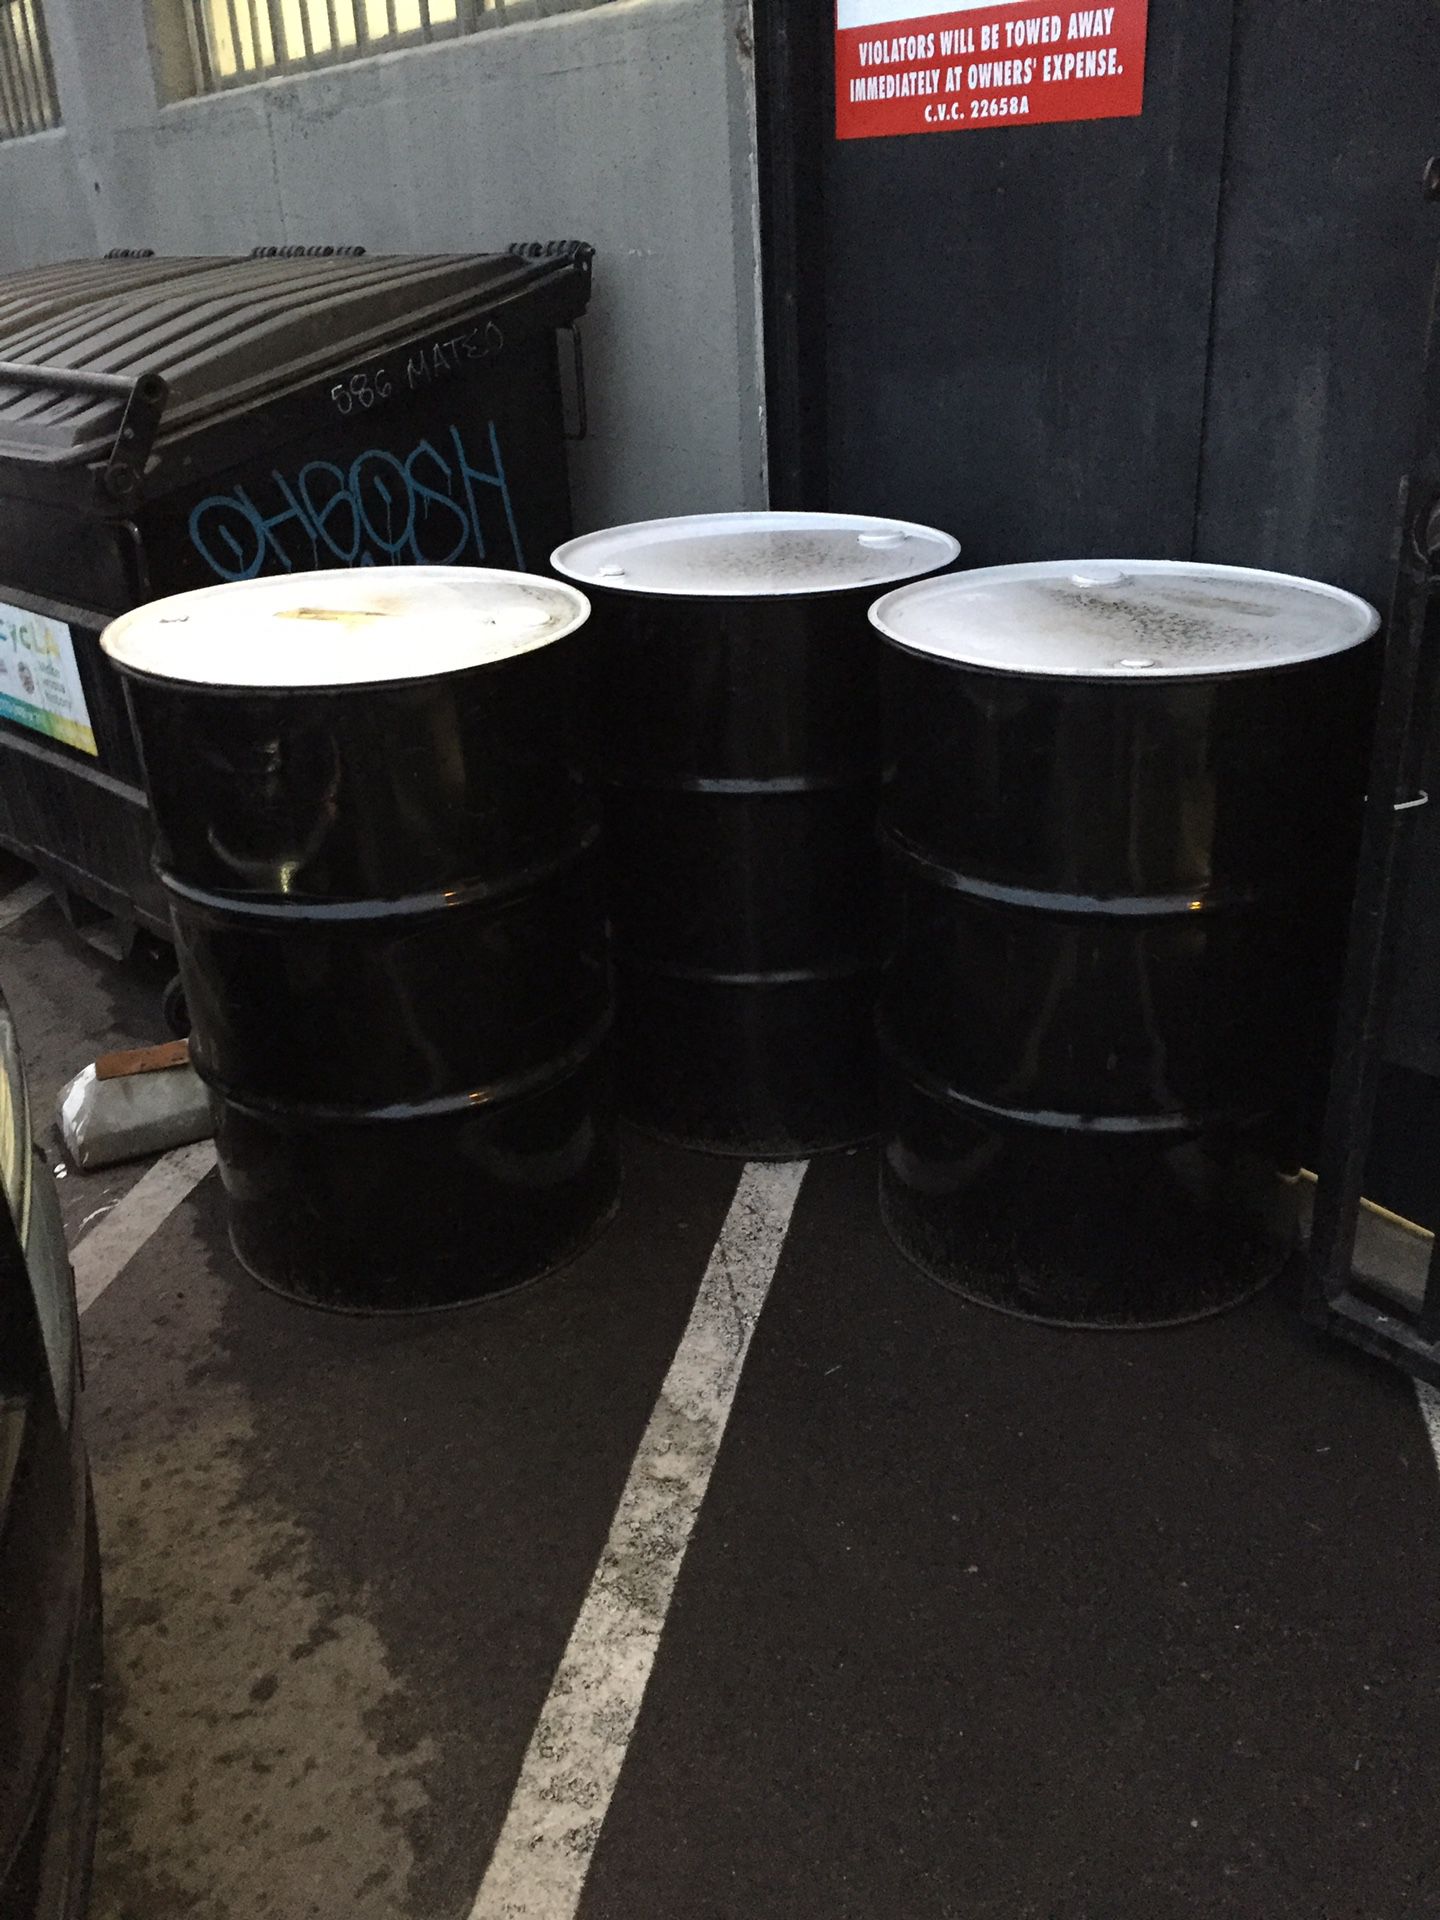 Free 55 gallon drums